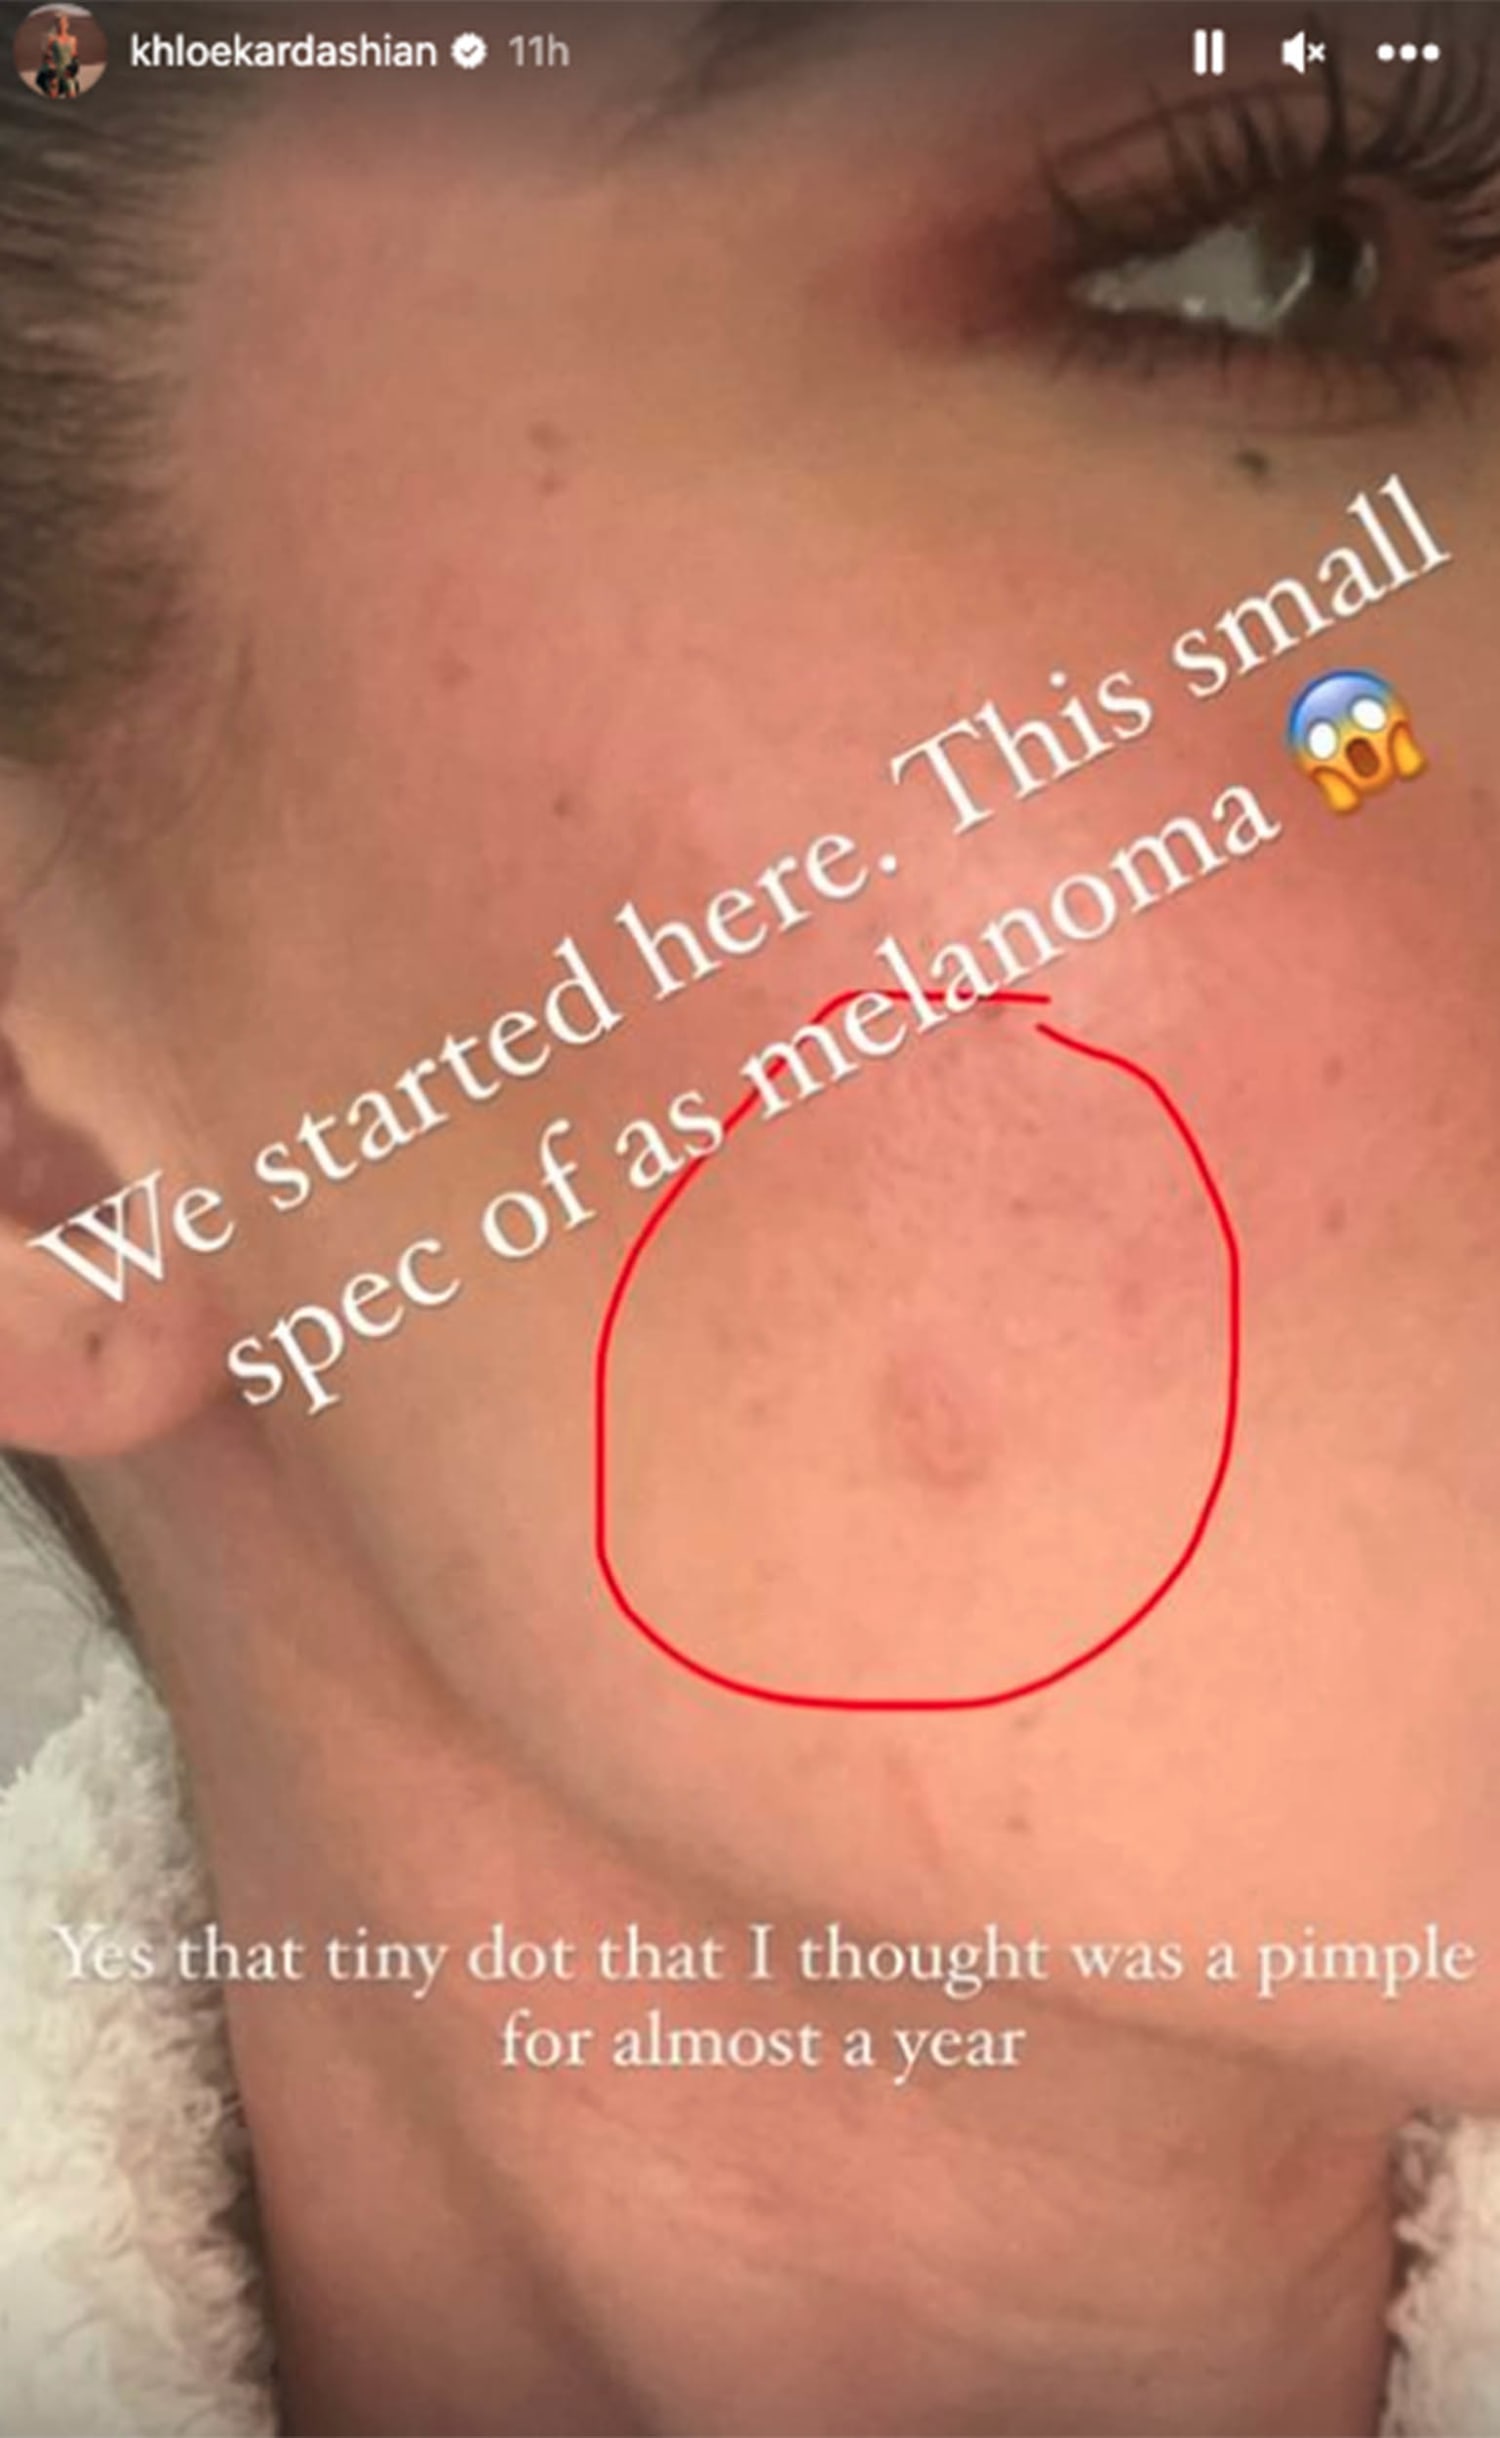 Khloé Kardashian Details Melanoma Tumor Removal From Face With Pics